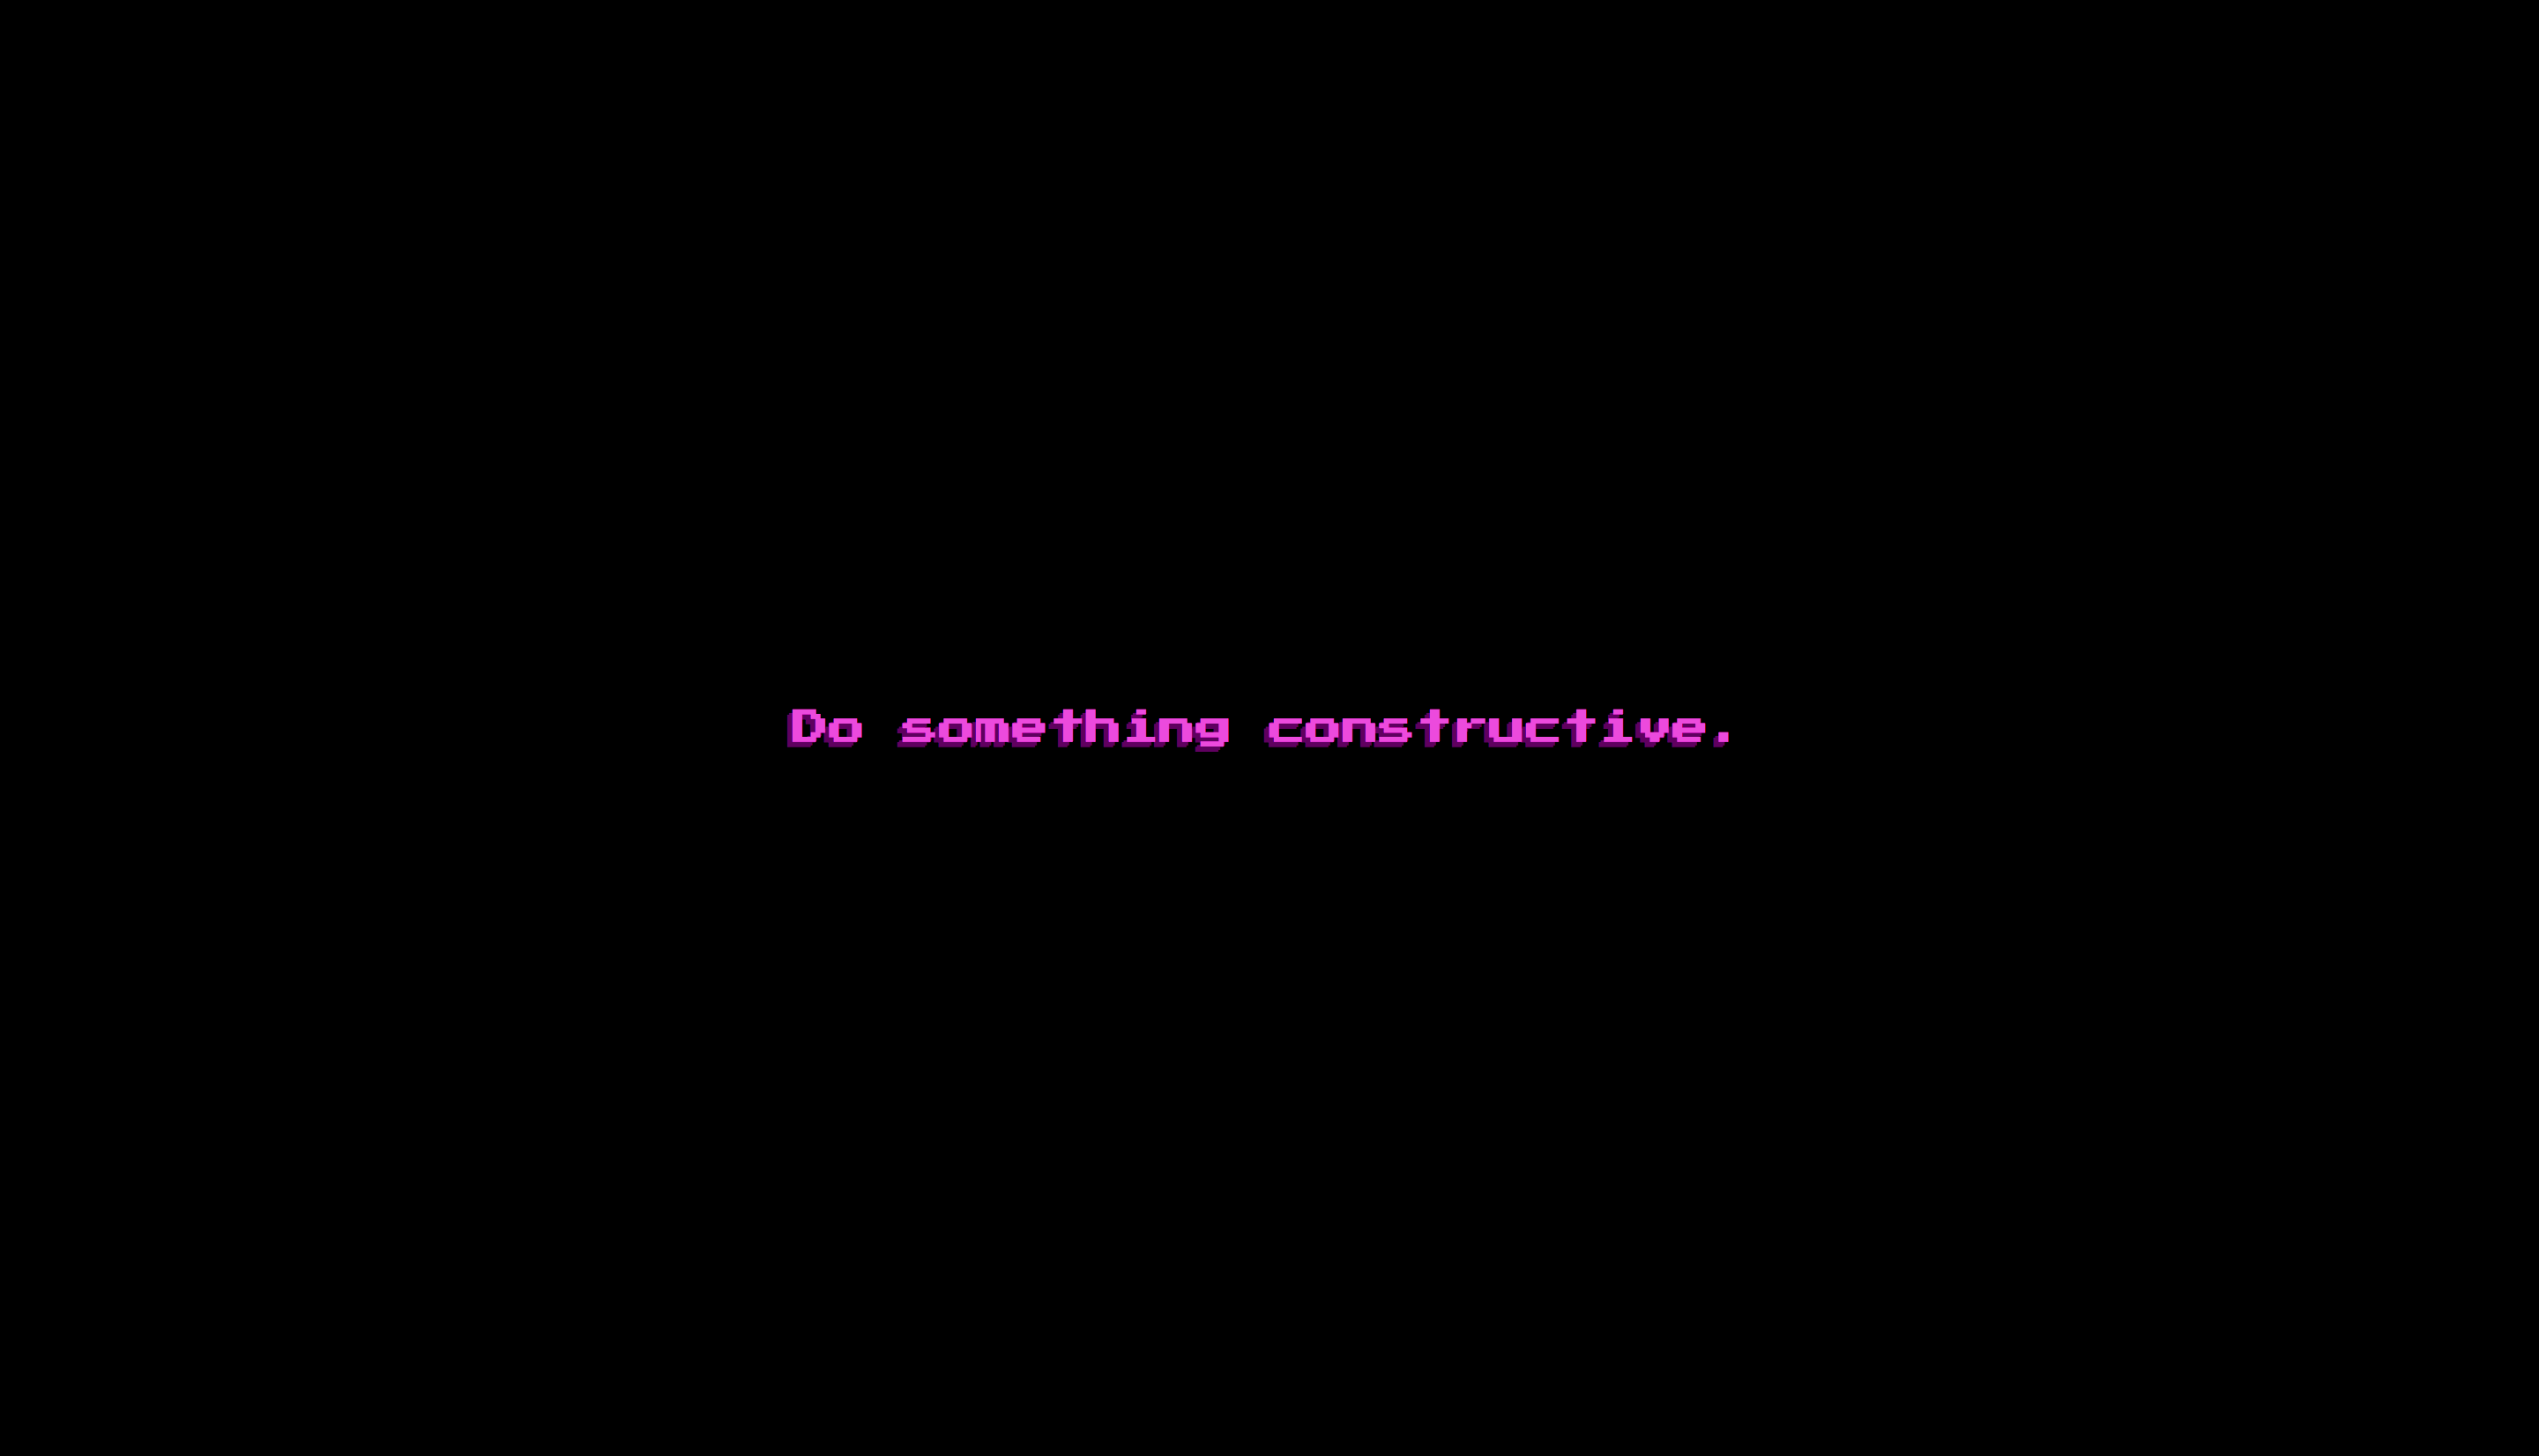 A snapshot of the website which shows a black screen and the words 'do something constructive' in the center of the viewport